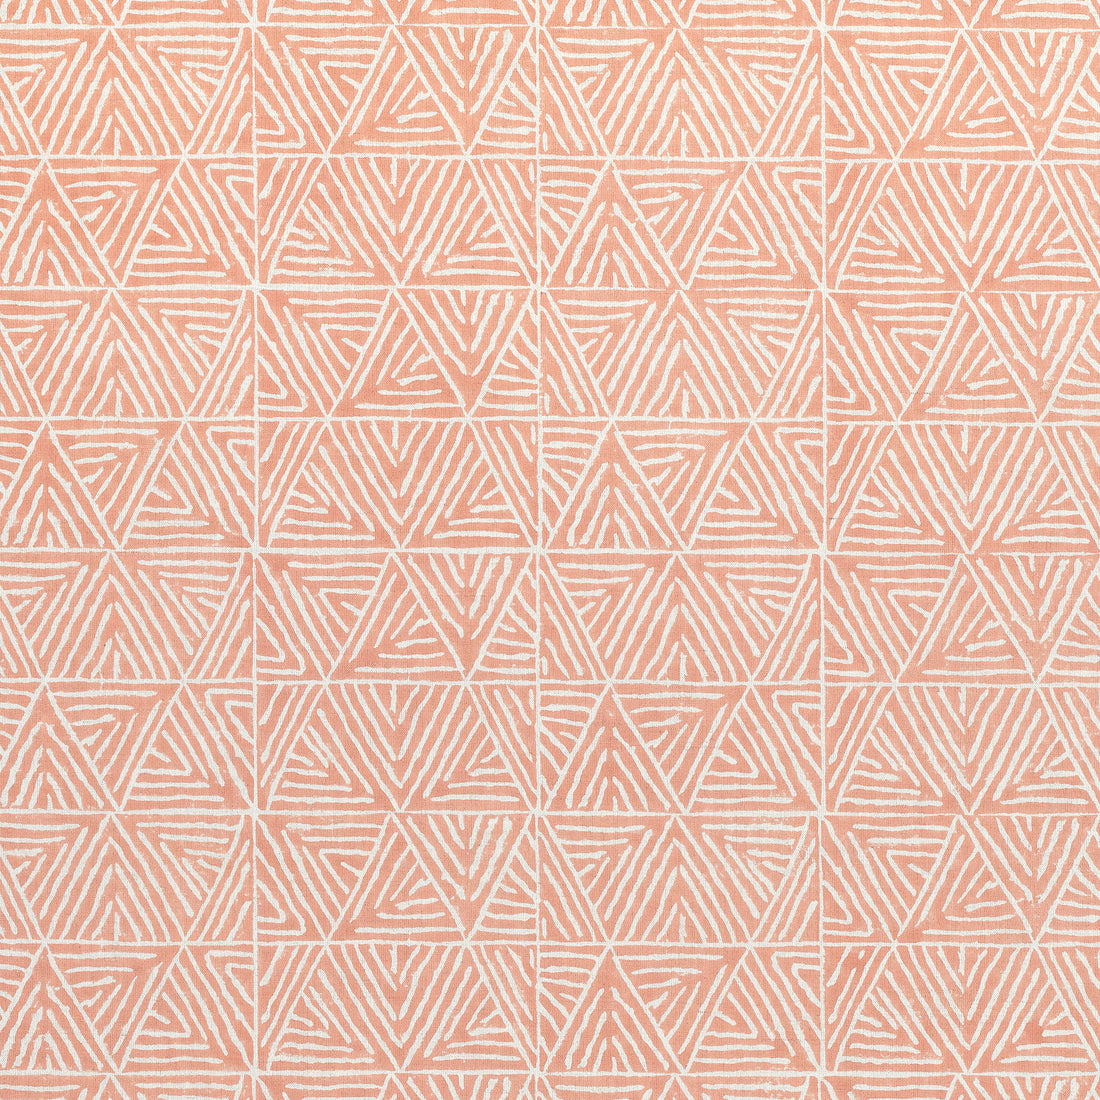 Mombasa fabric in cinnamon color - pattern number F910208 - by Thibaut in the Colony collection